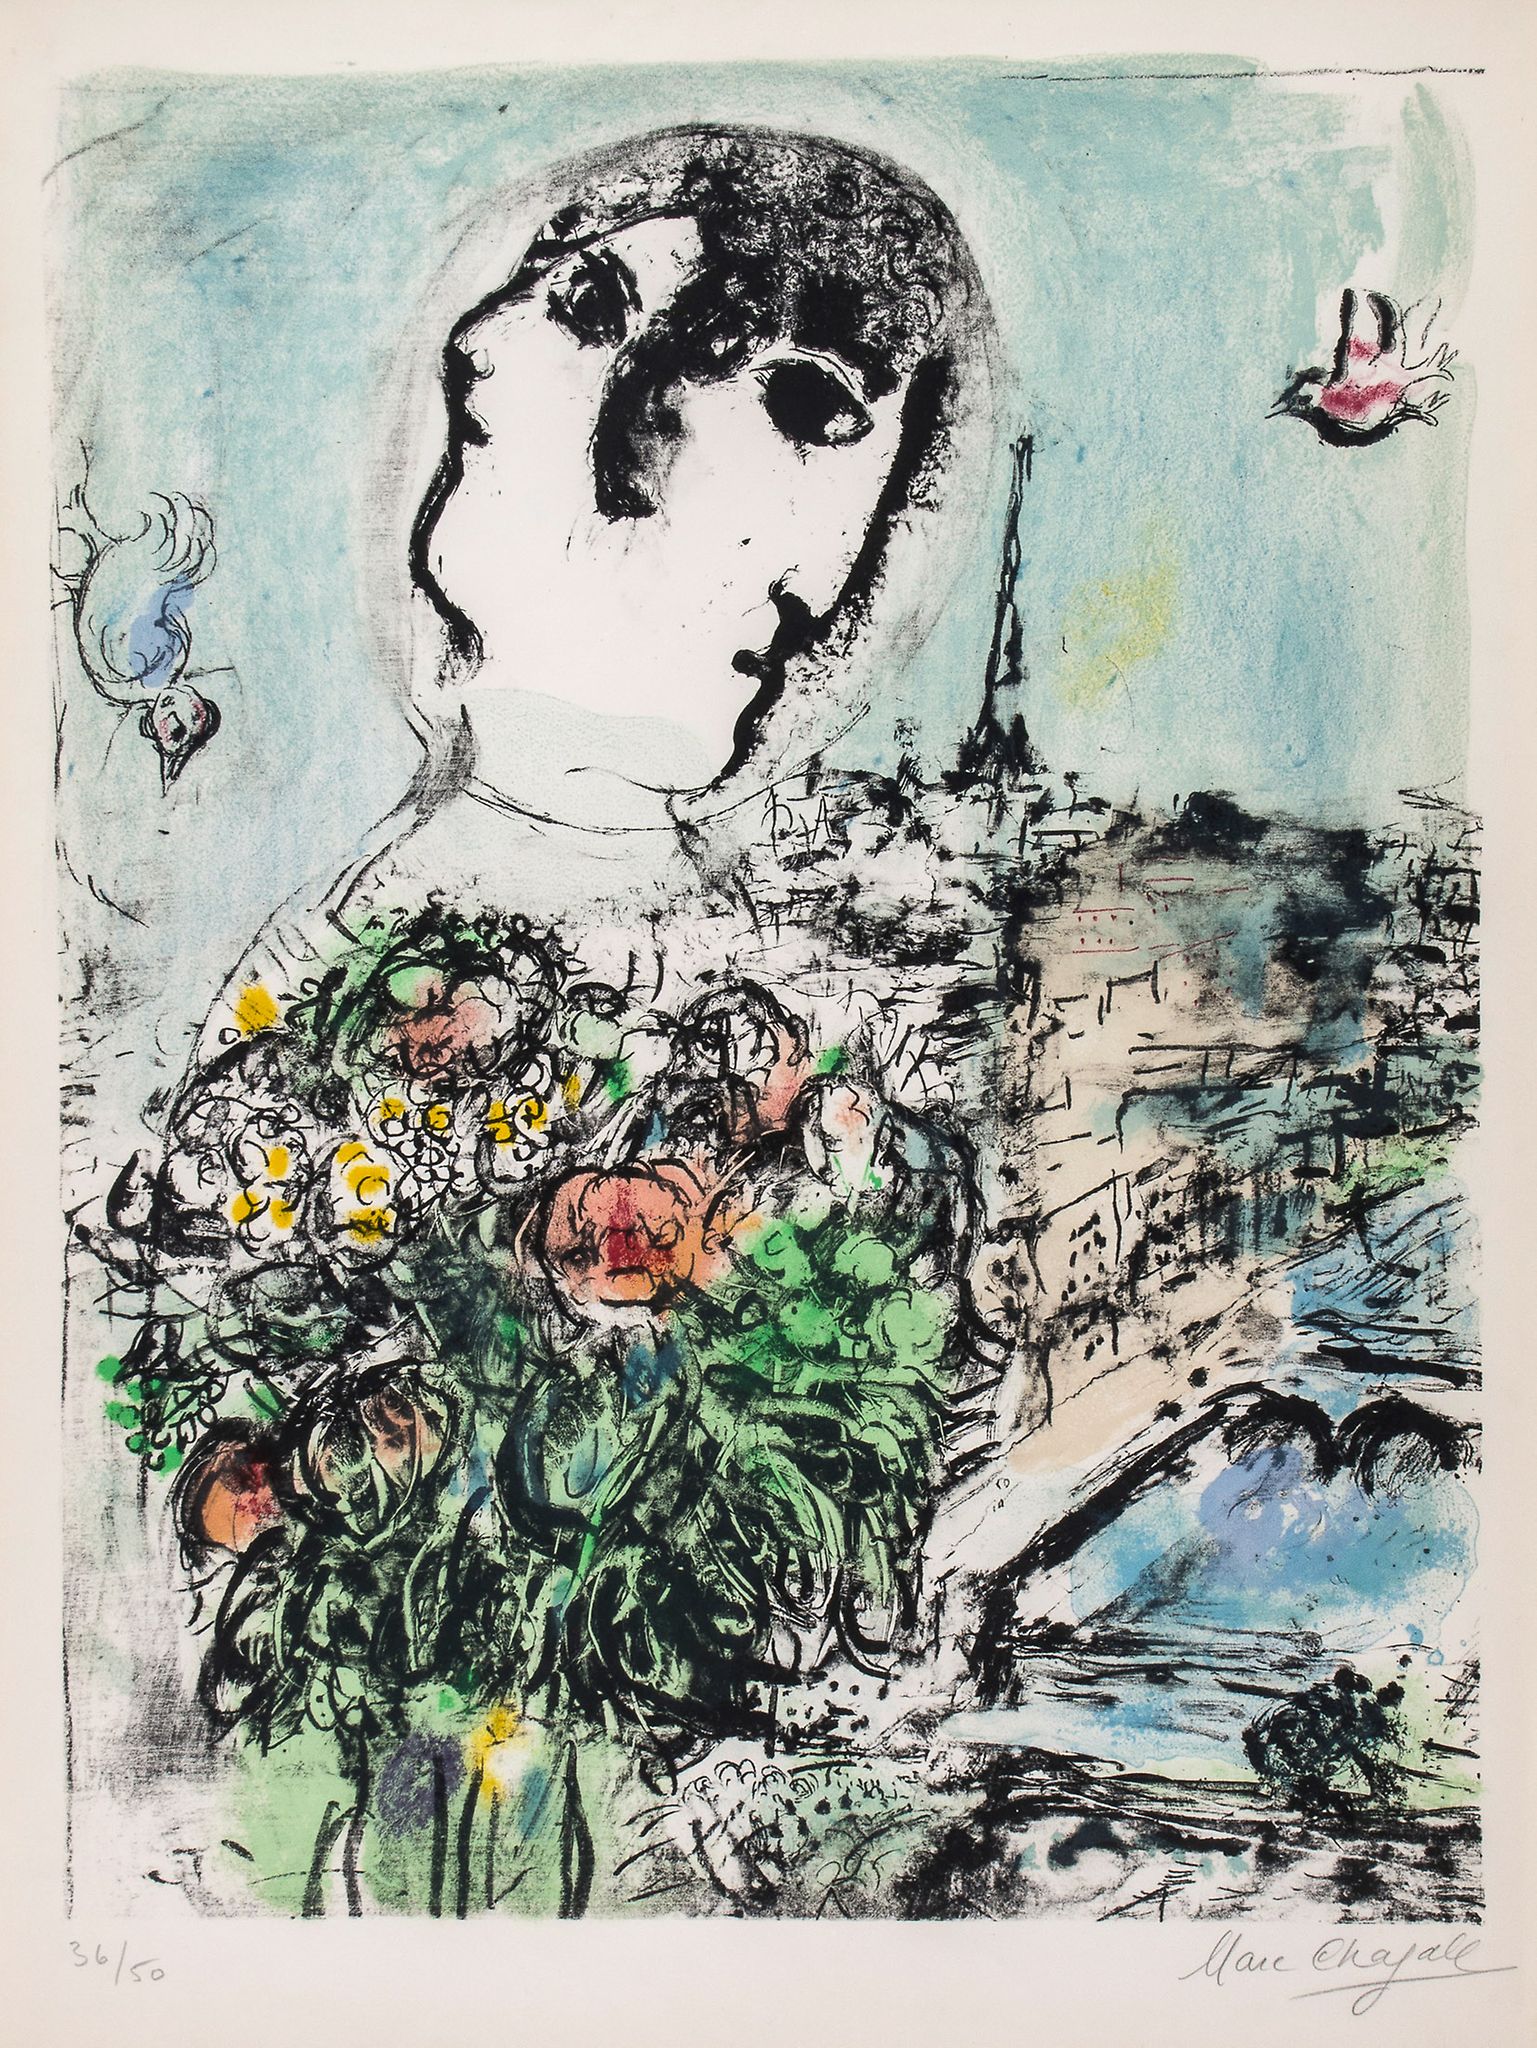 Marc Chagall (1887-1985) - The River (M.586) lithograph printed in colors, 1969, signed in pencil,